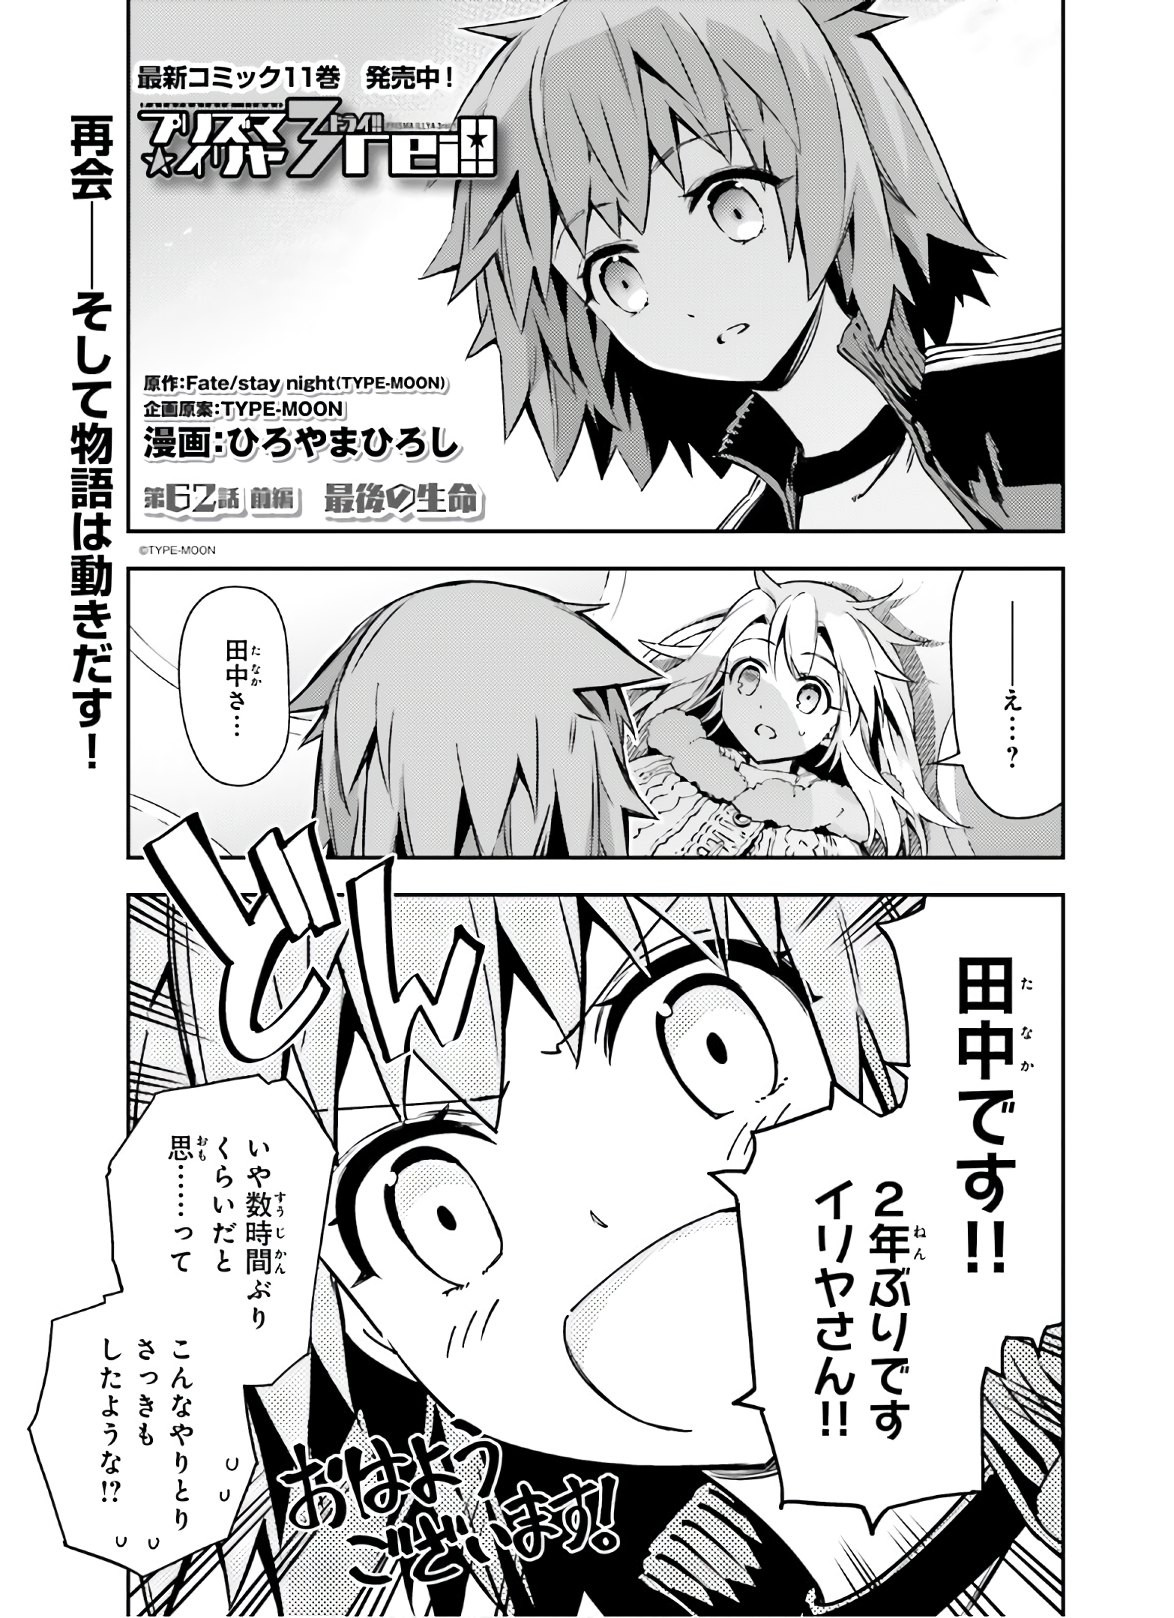 Fate/Kaleid Liner Prisma Illya Drei! - Chapter 62-1 - Page 1